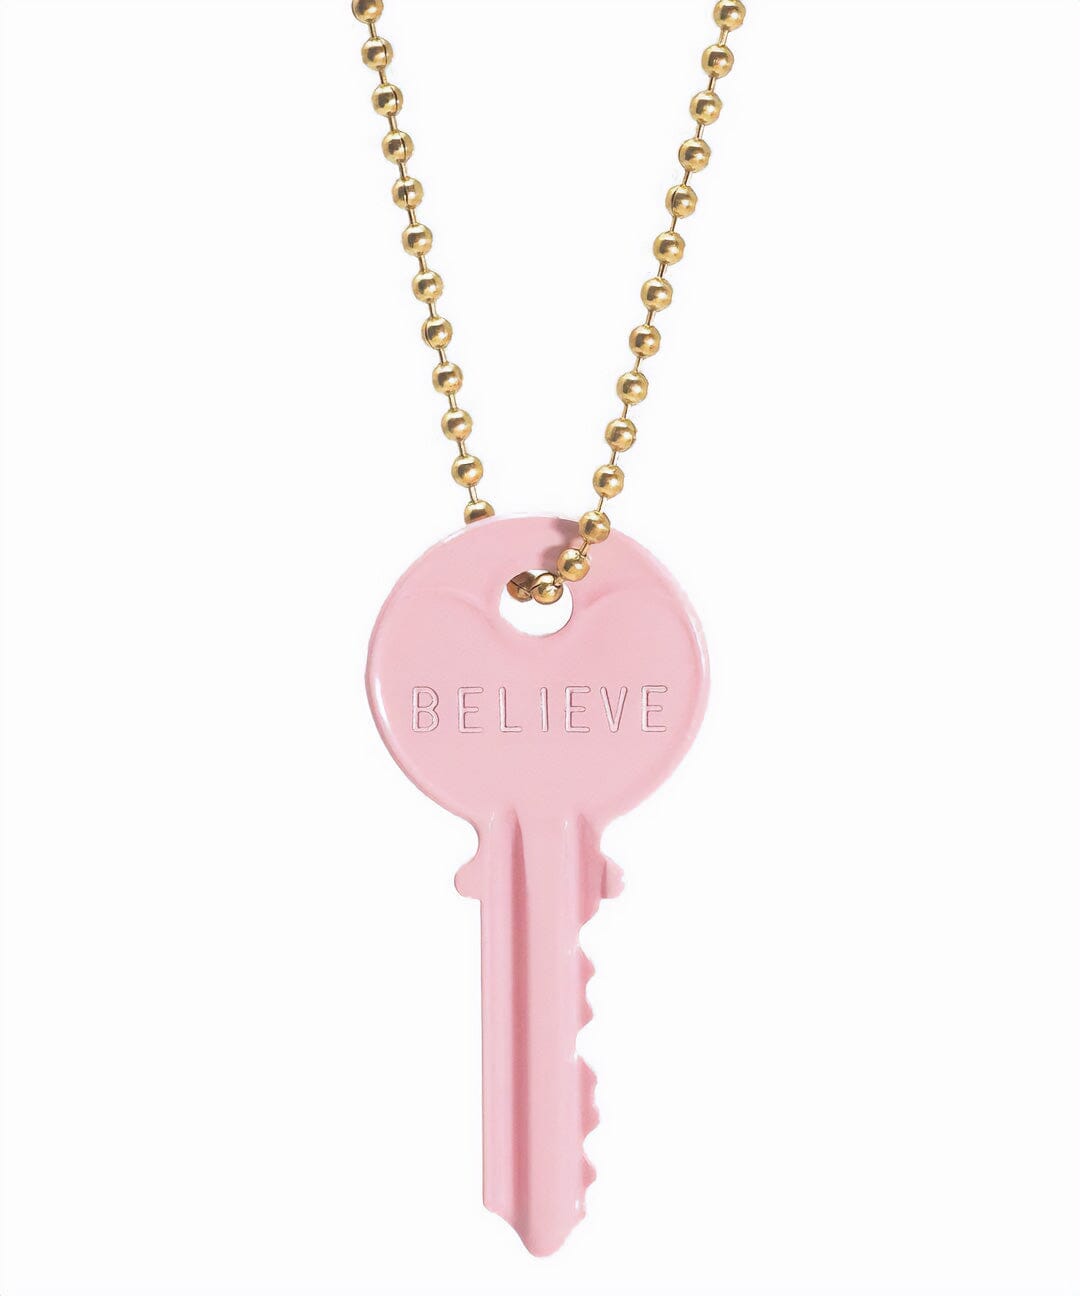 N - Pastel Pink Classic Ball Chain Key Necklace Necklaces The Giving Keys Gold 